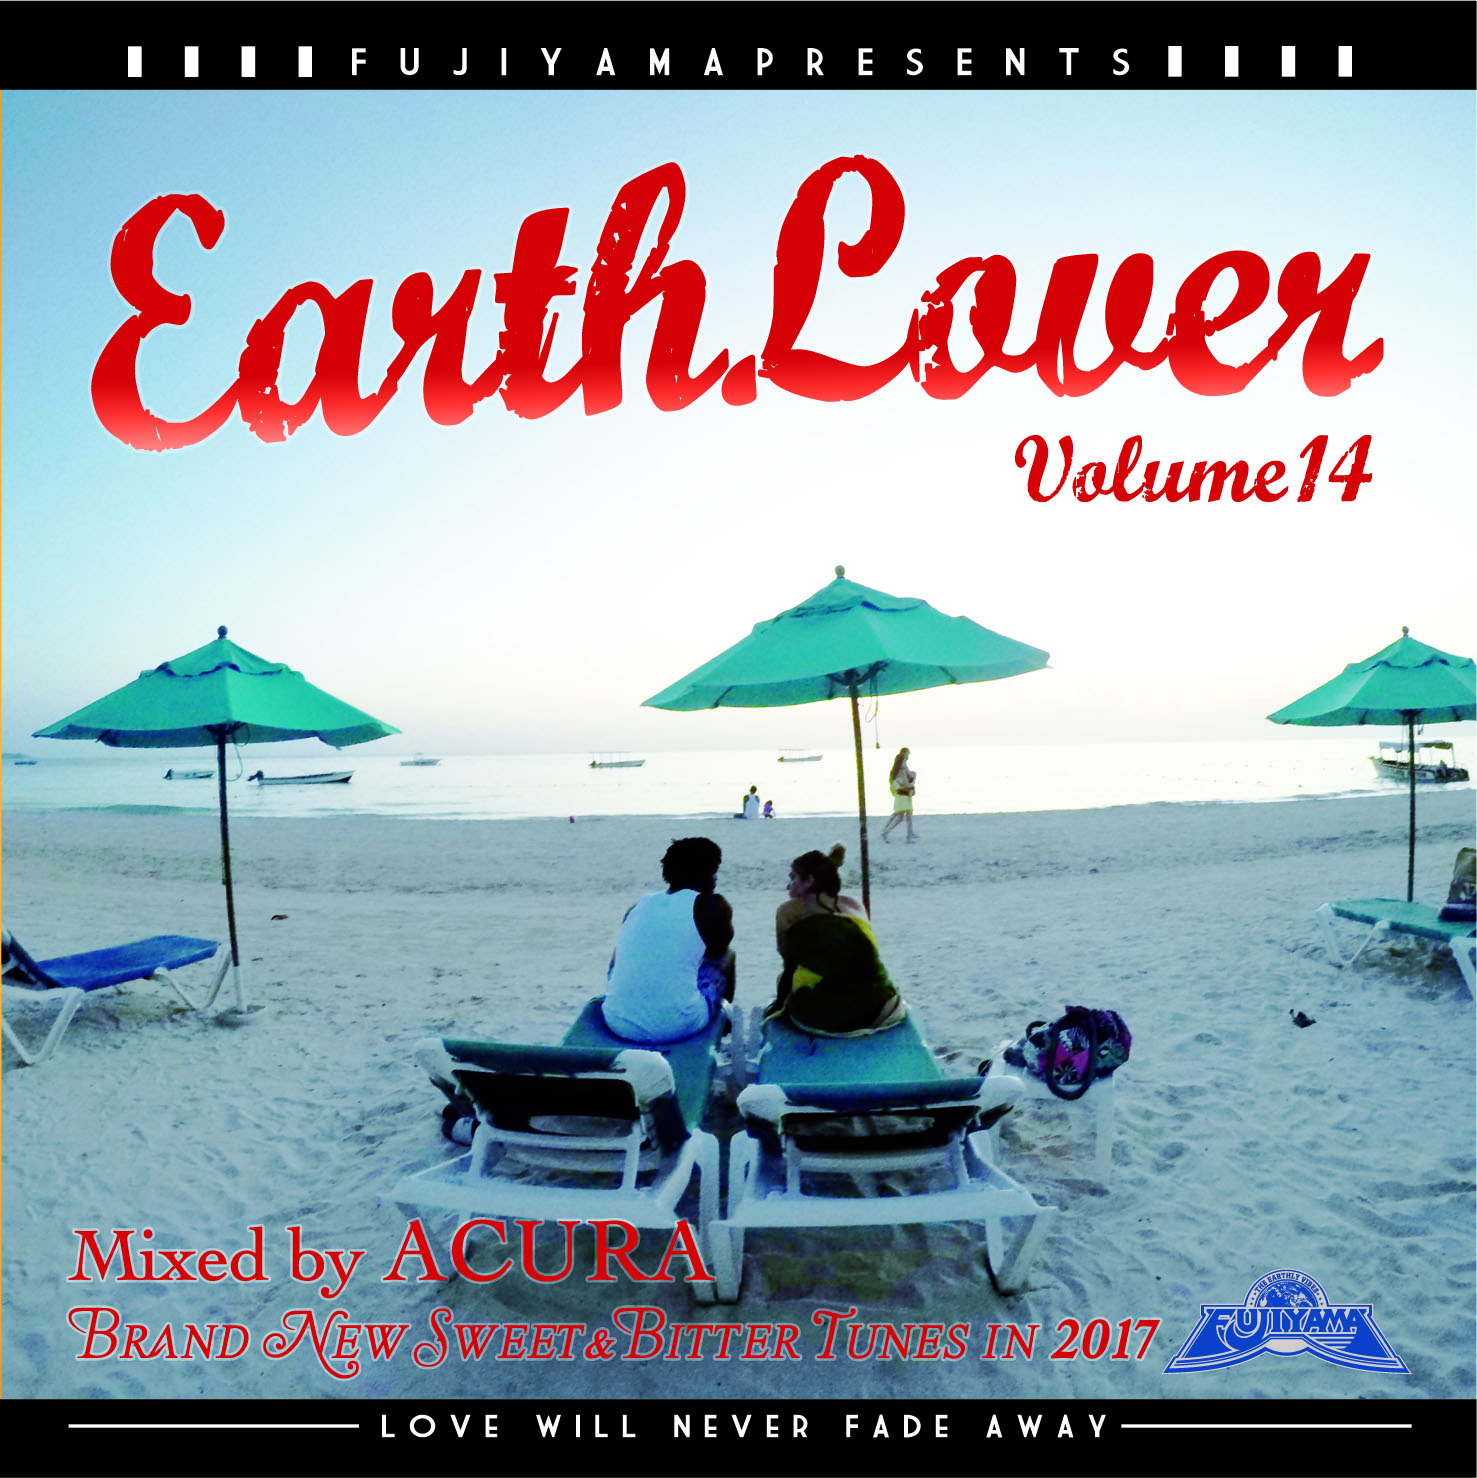 EARTH LOVER Vol.14 : Brand New Sweet & Bitter Tunes in 2017